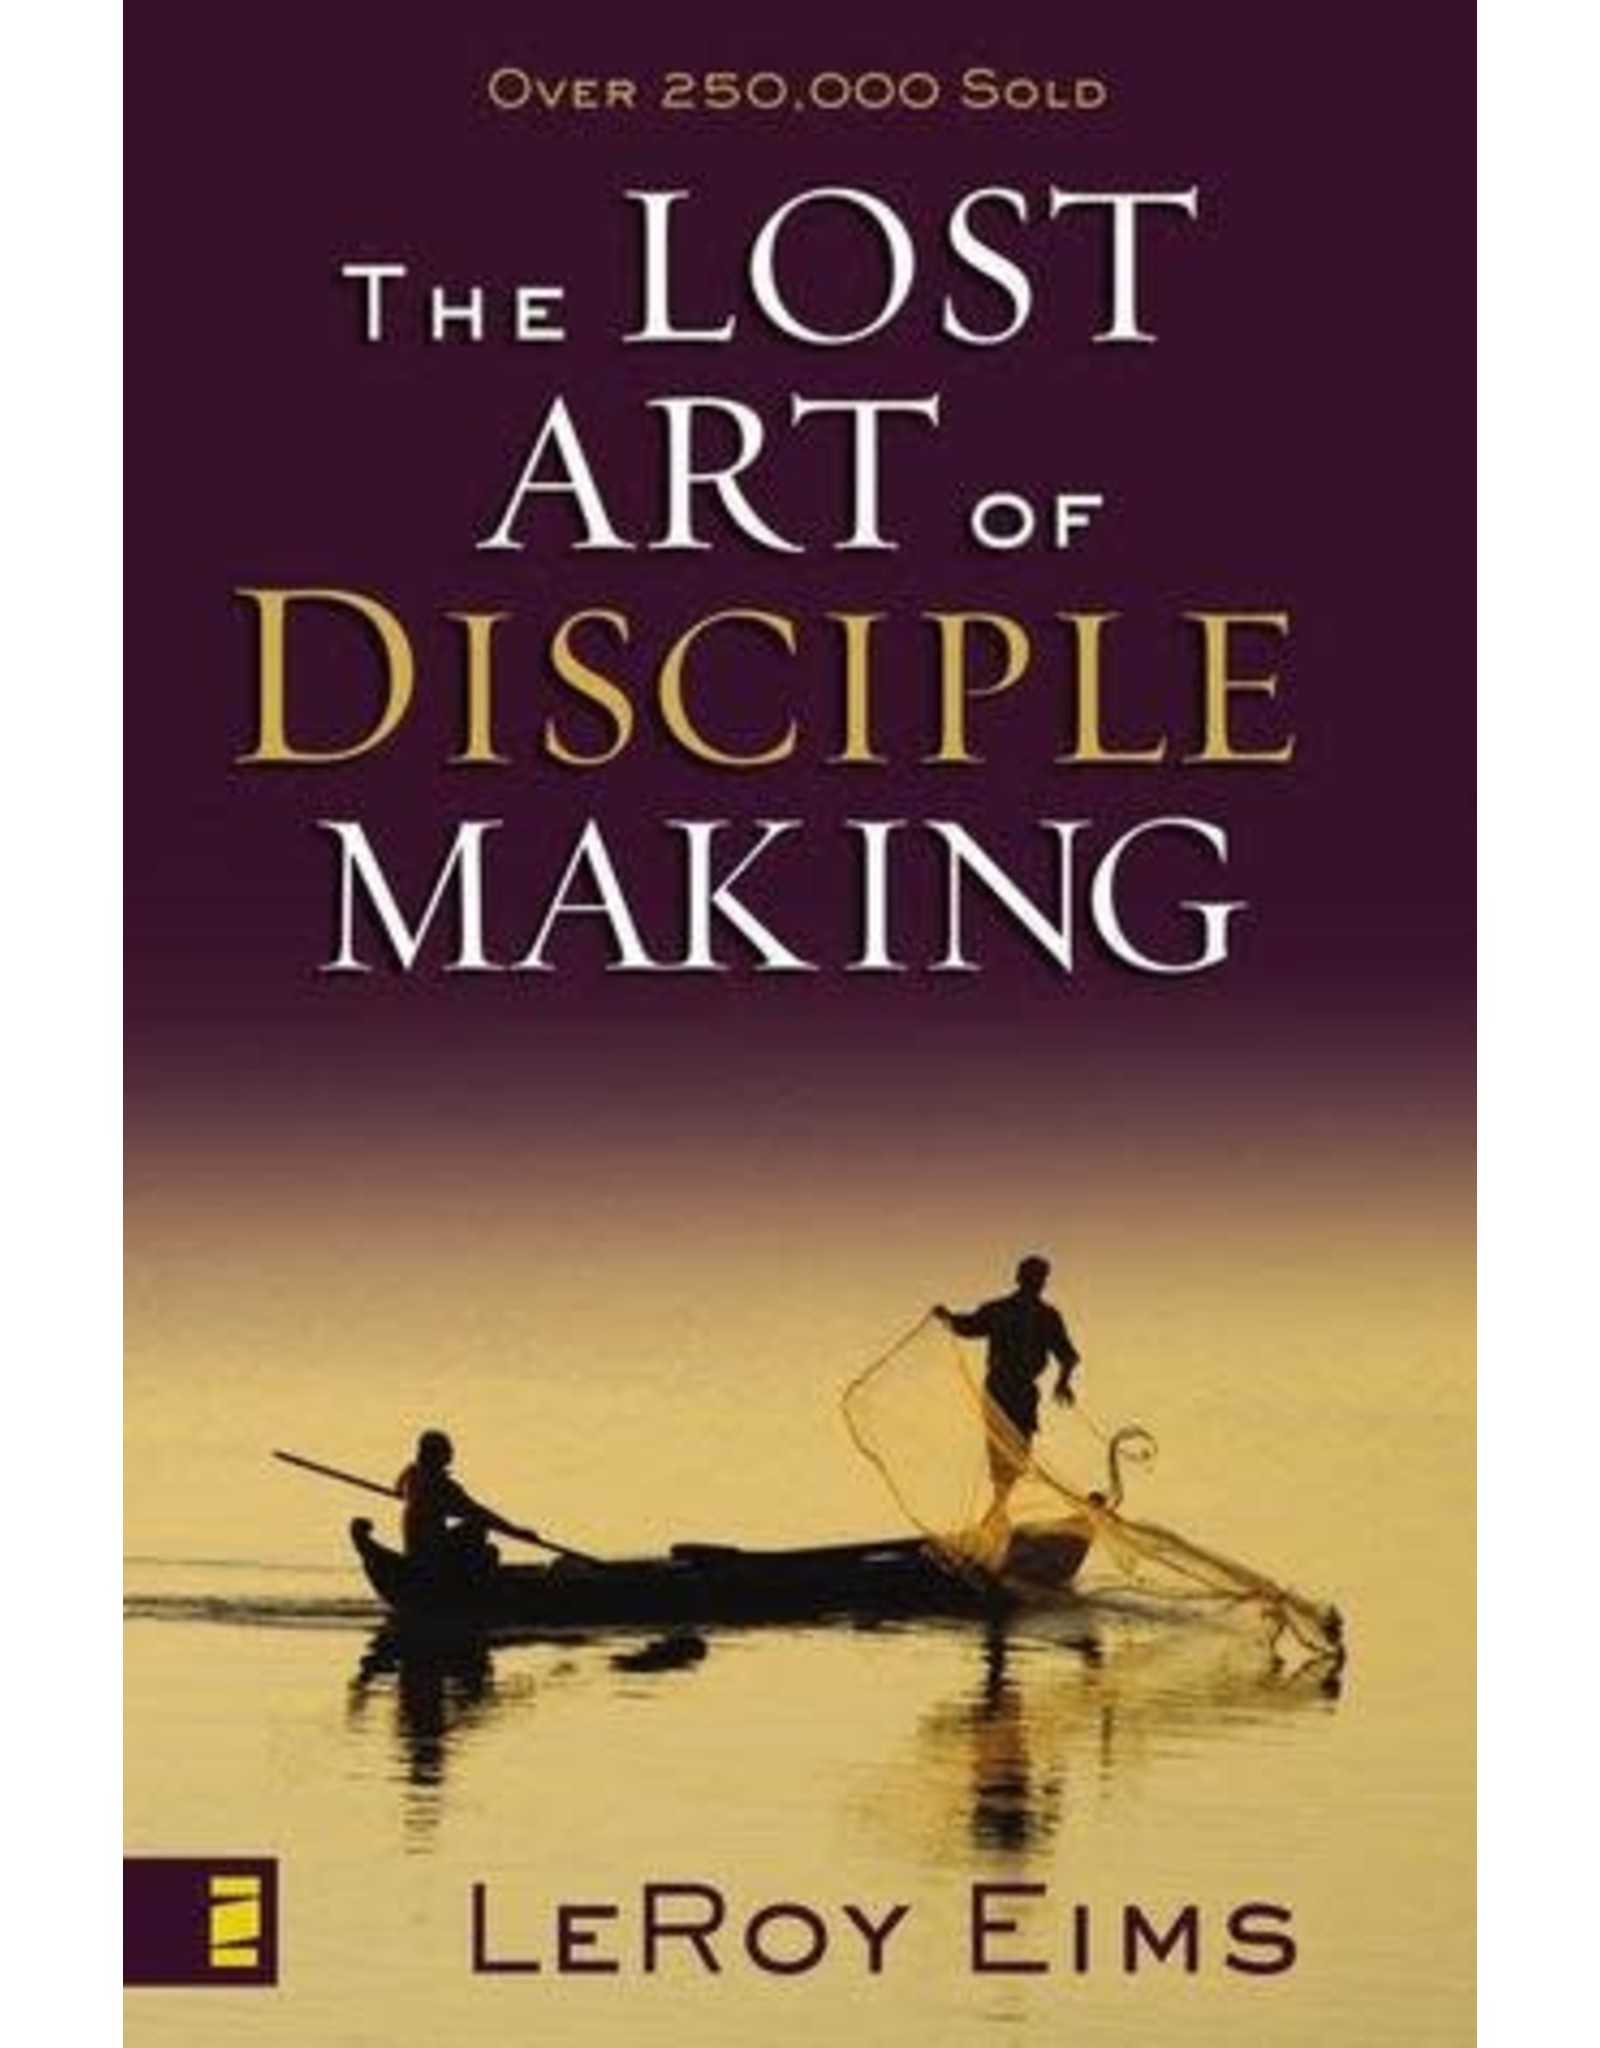 Eims The Lost Art of Disciple Making